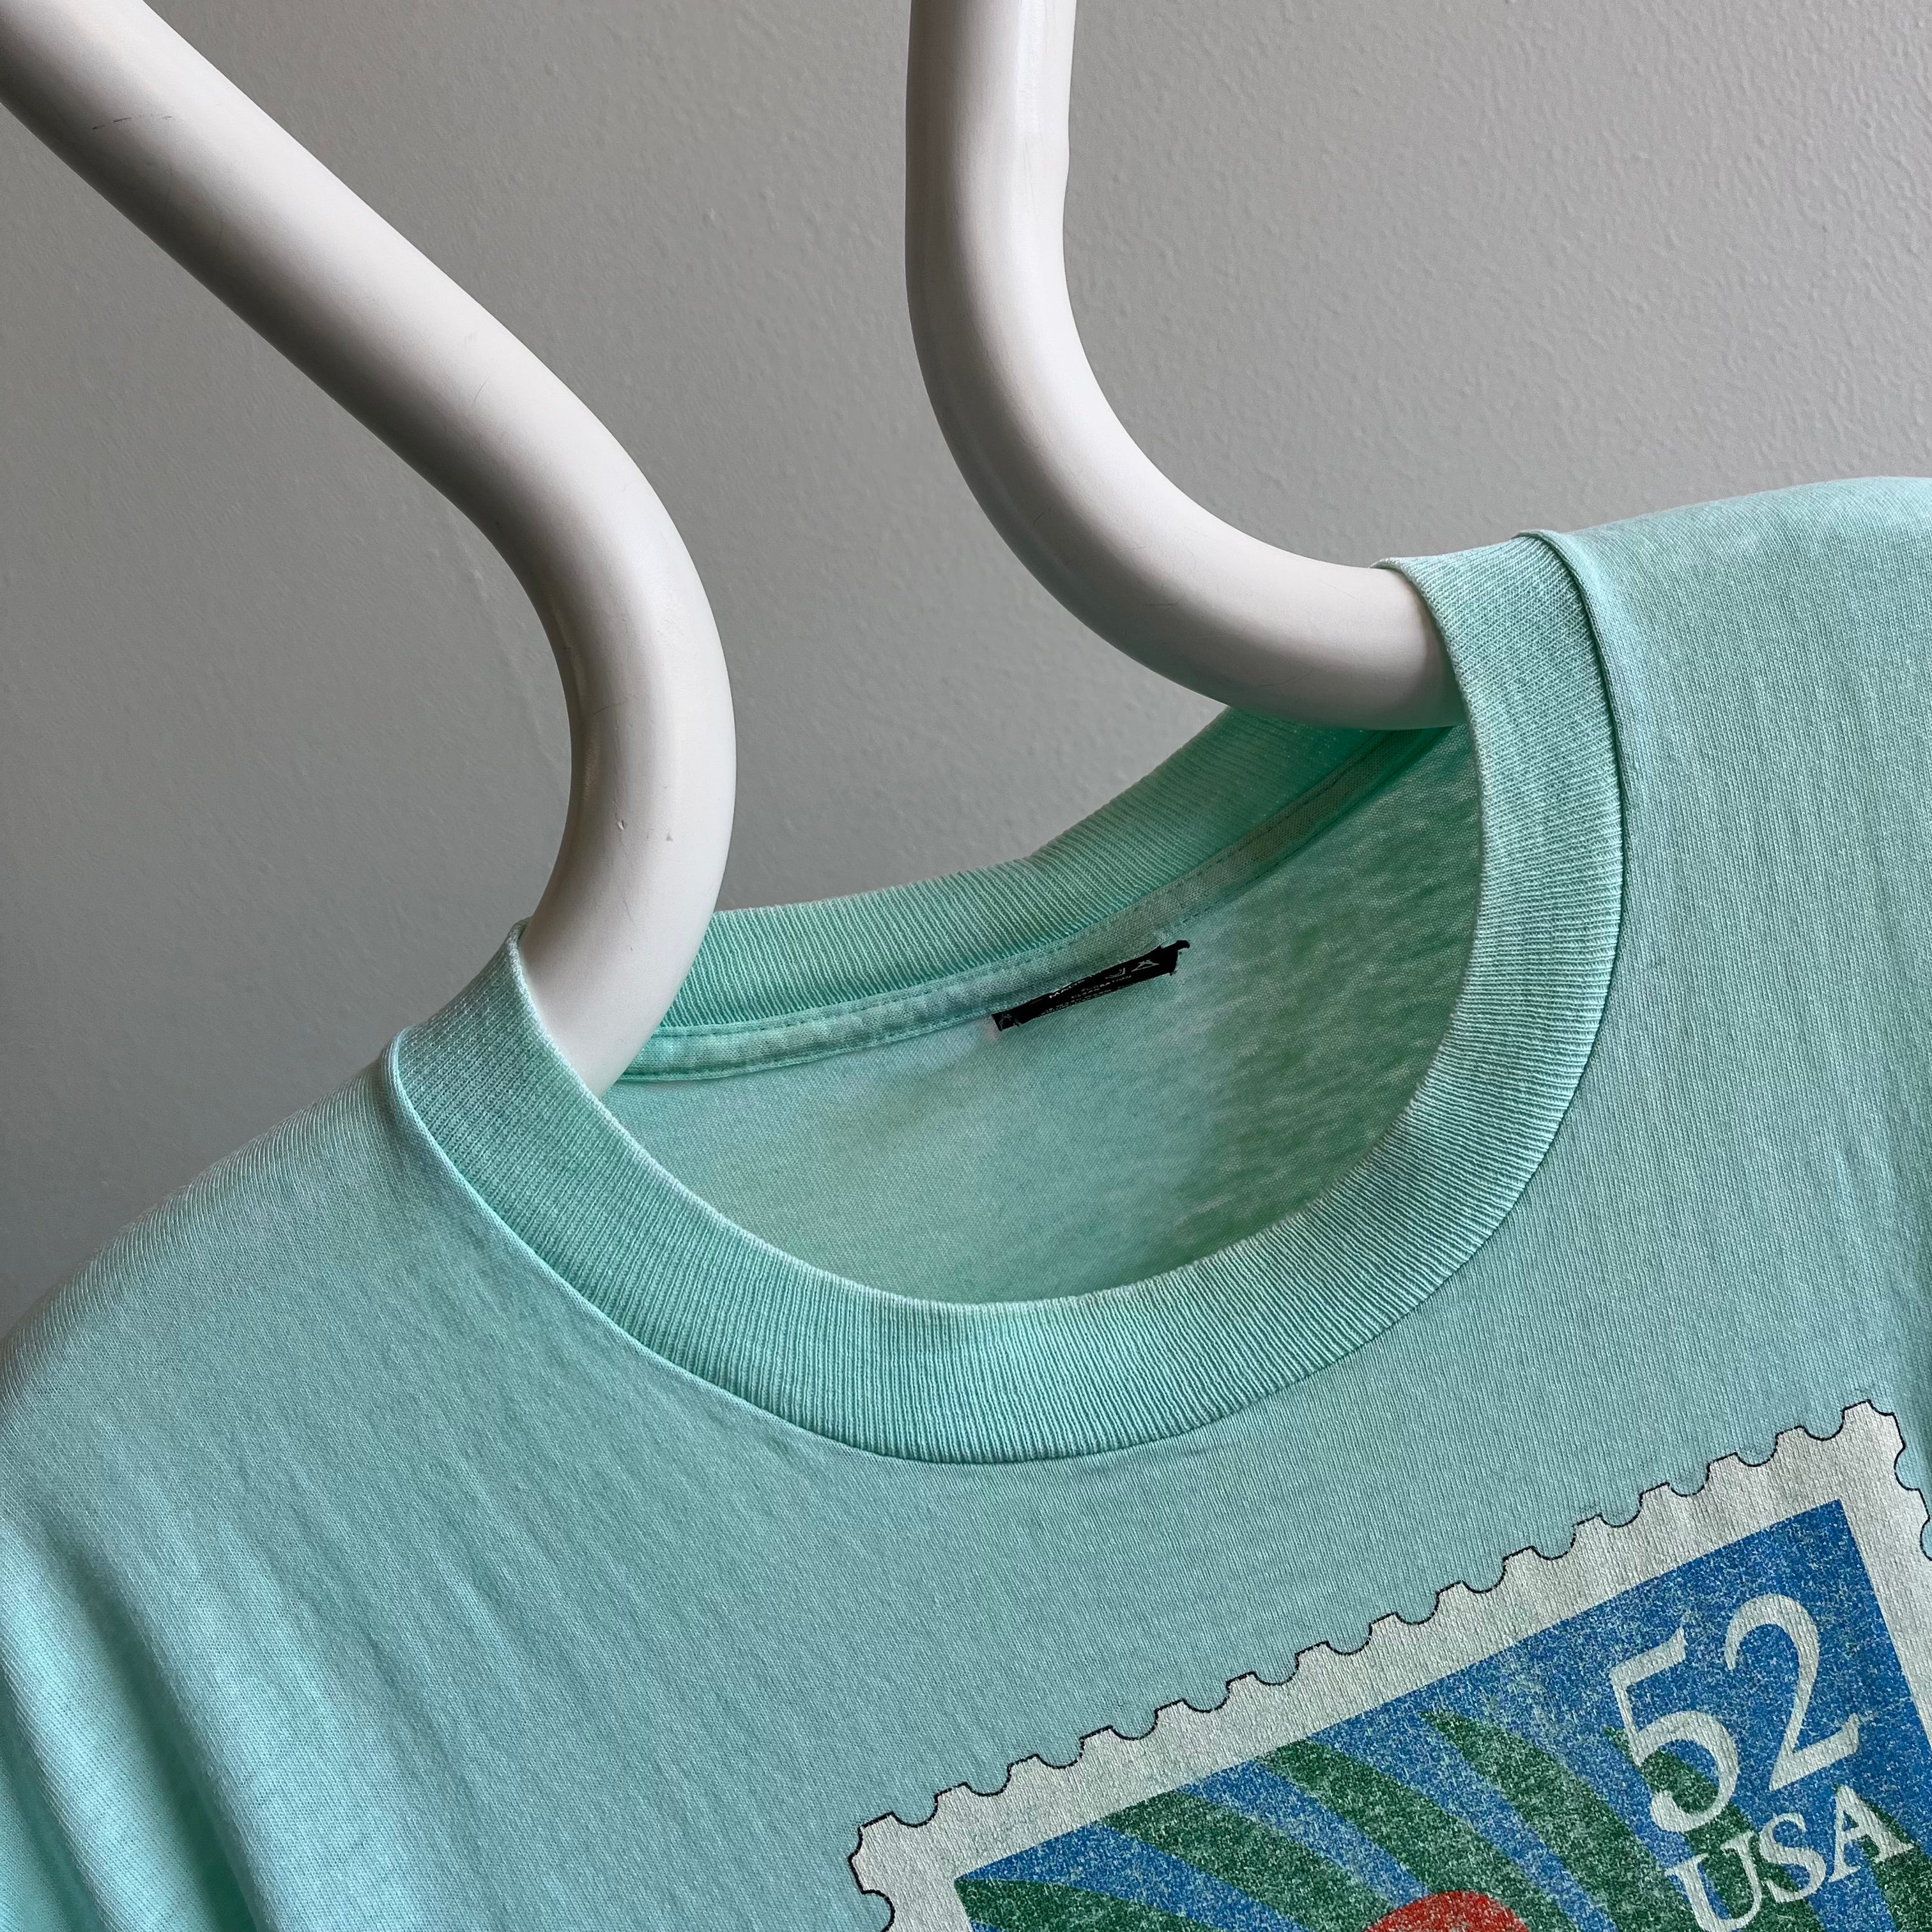 1991 USPS 52 Cent Stamp T-Shirt with a Parrot